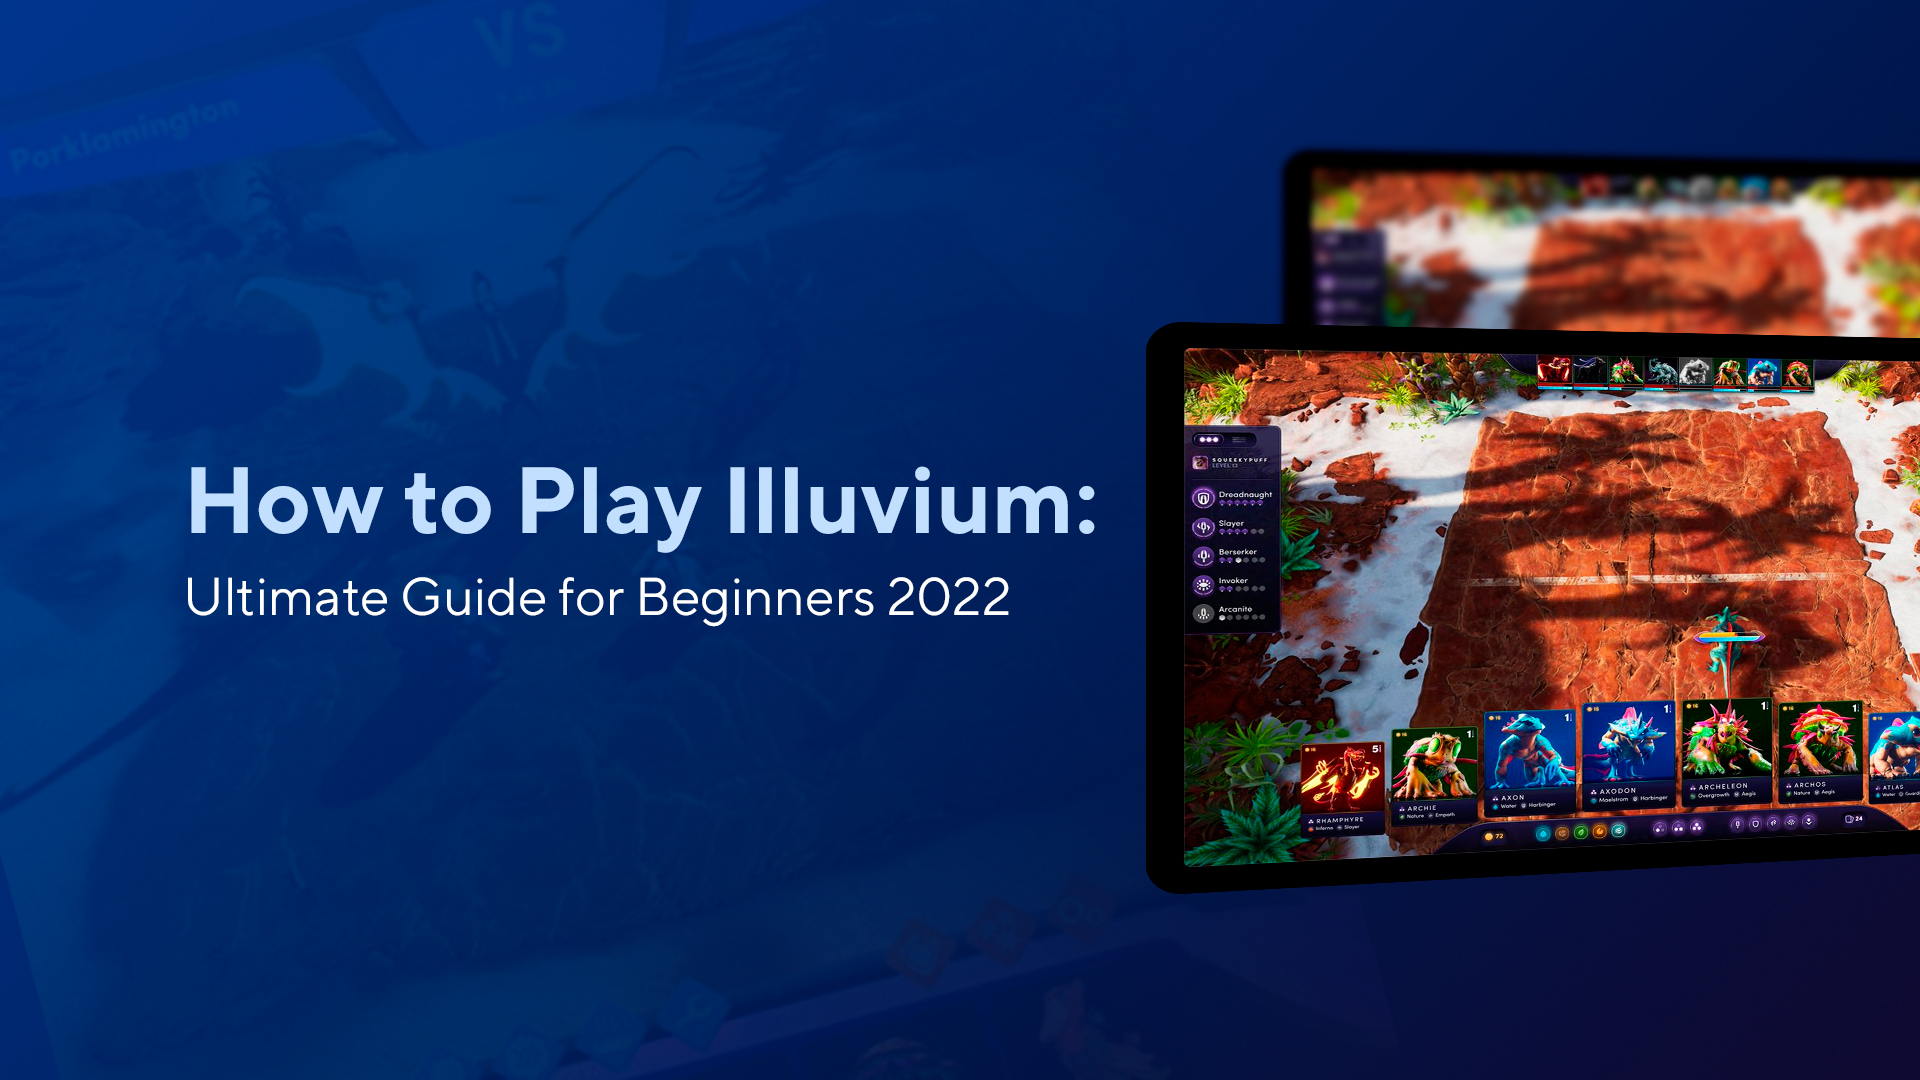 How to Play Illuvium: Ultimate Guide for Beginners 2022